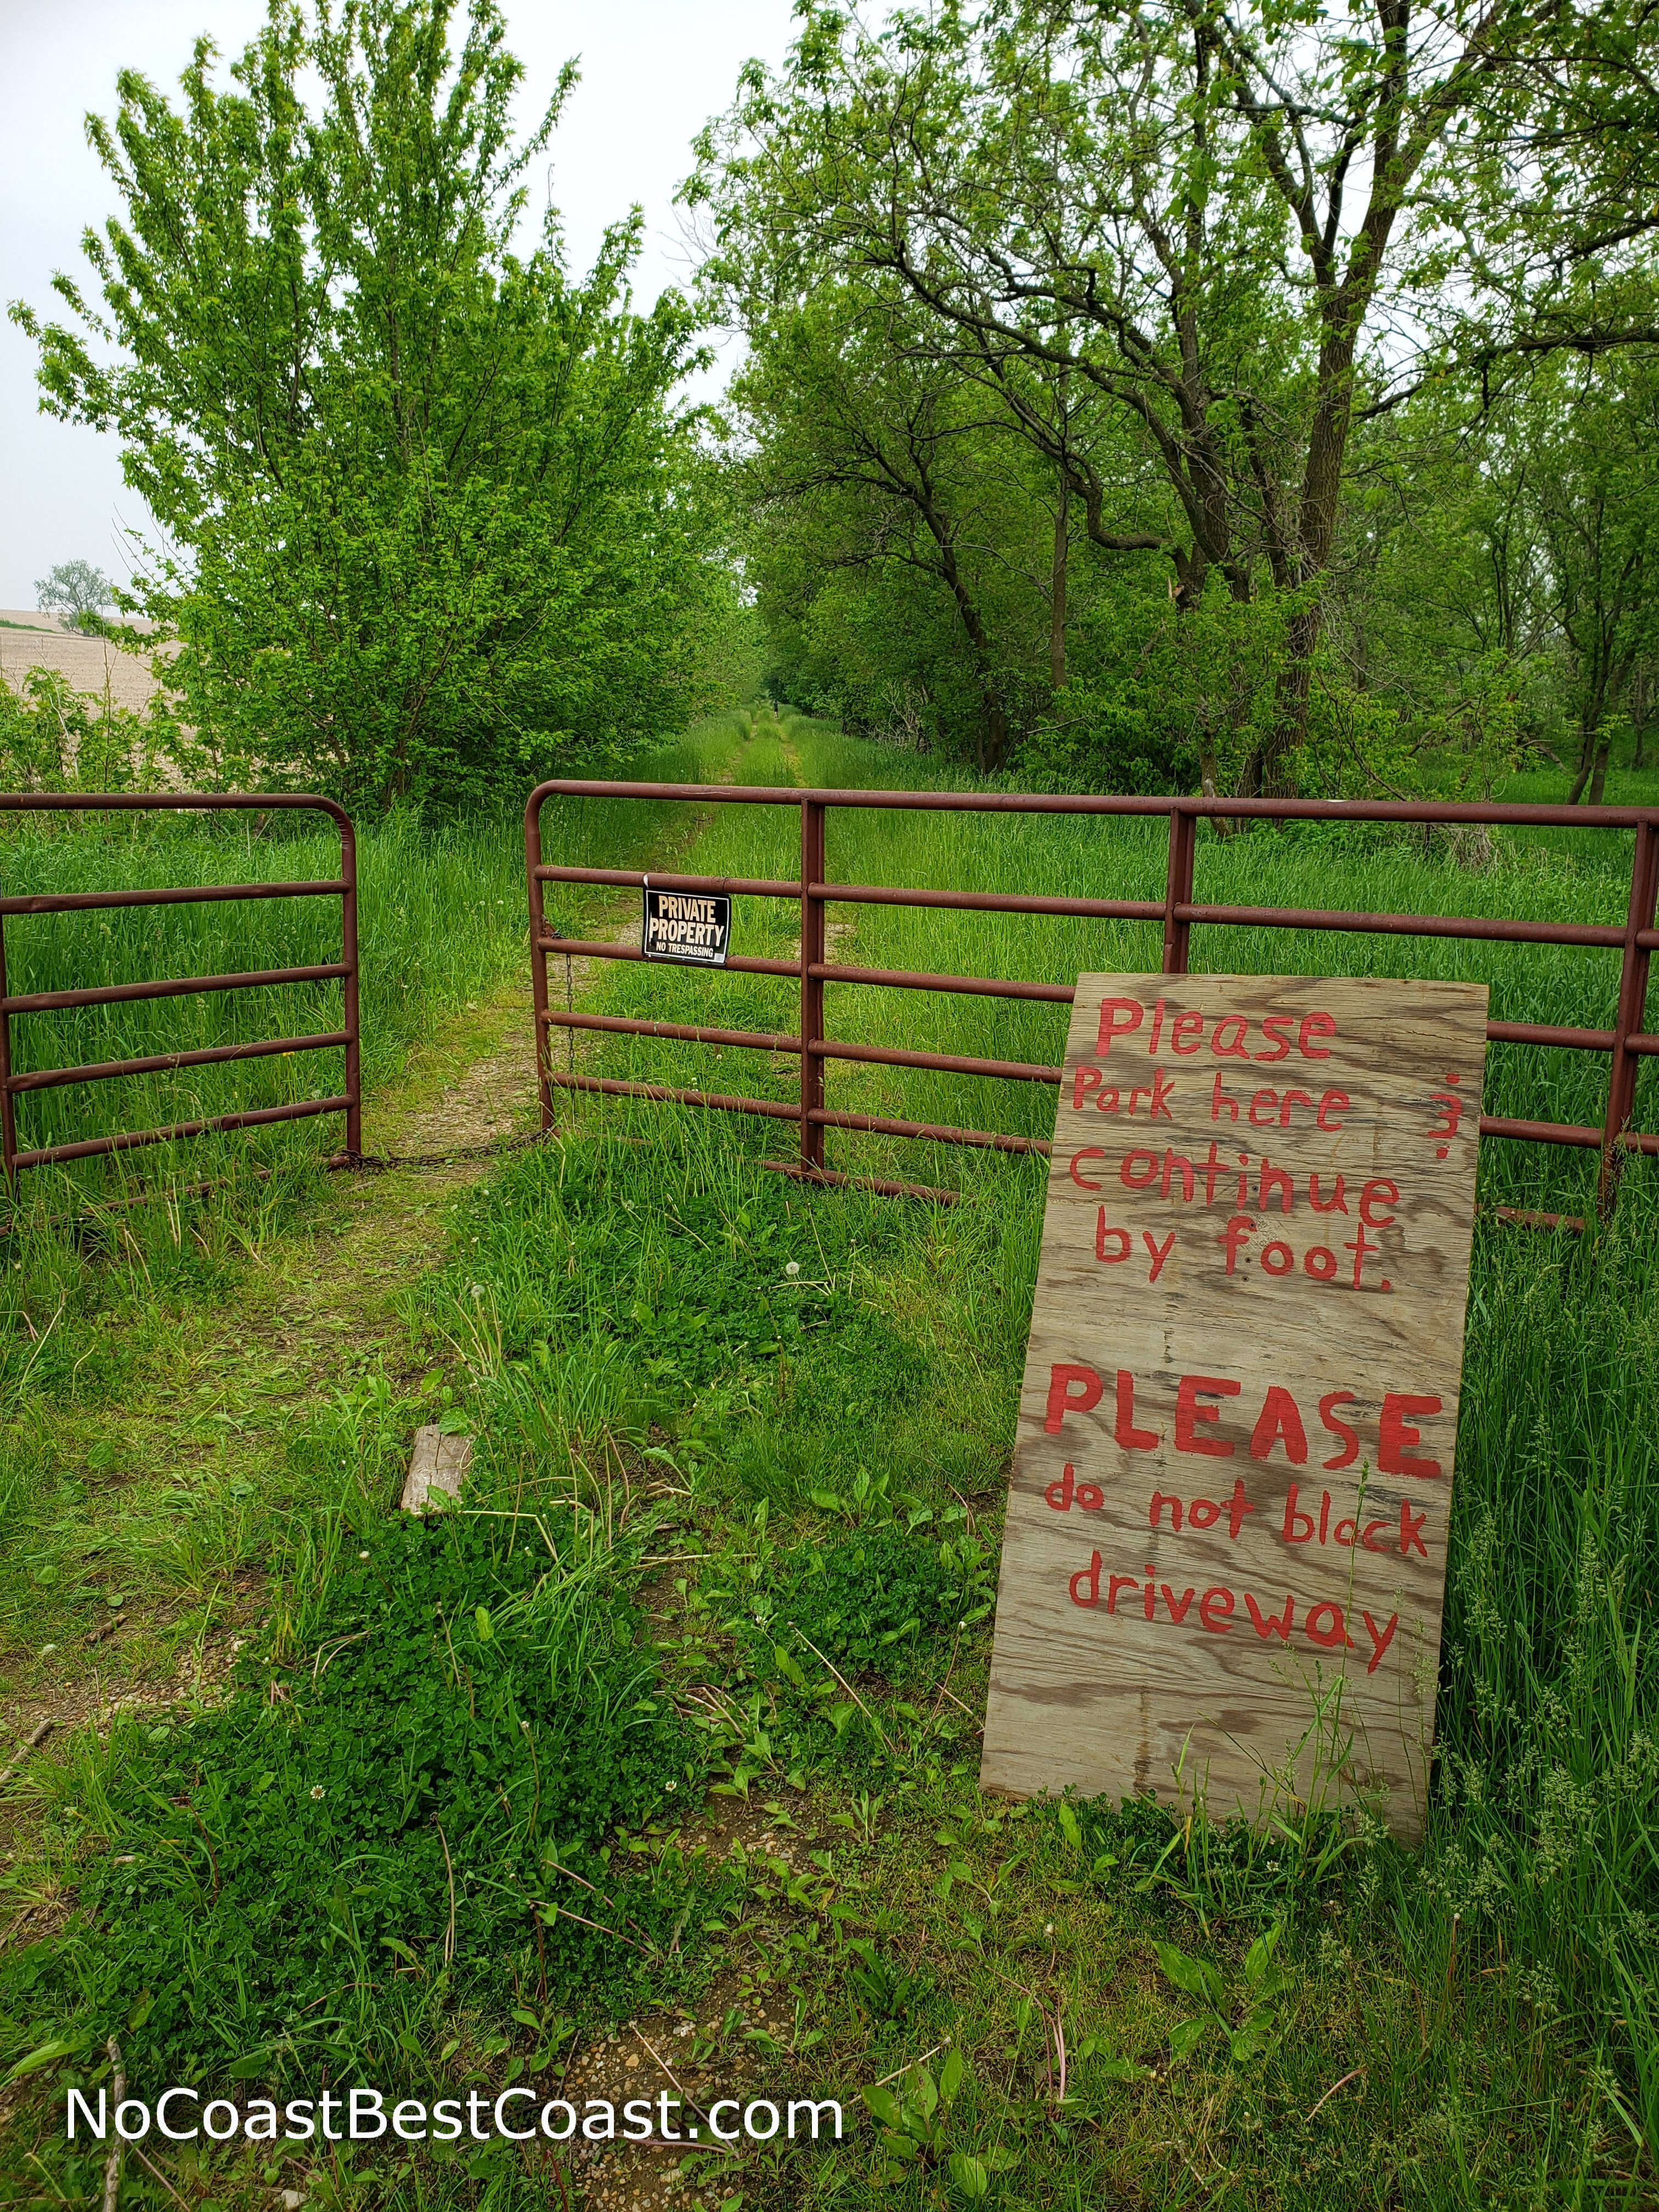 The sign at the gate leading onto the property